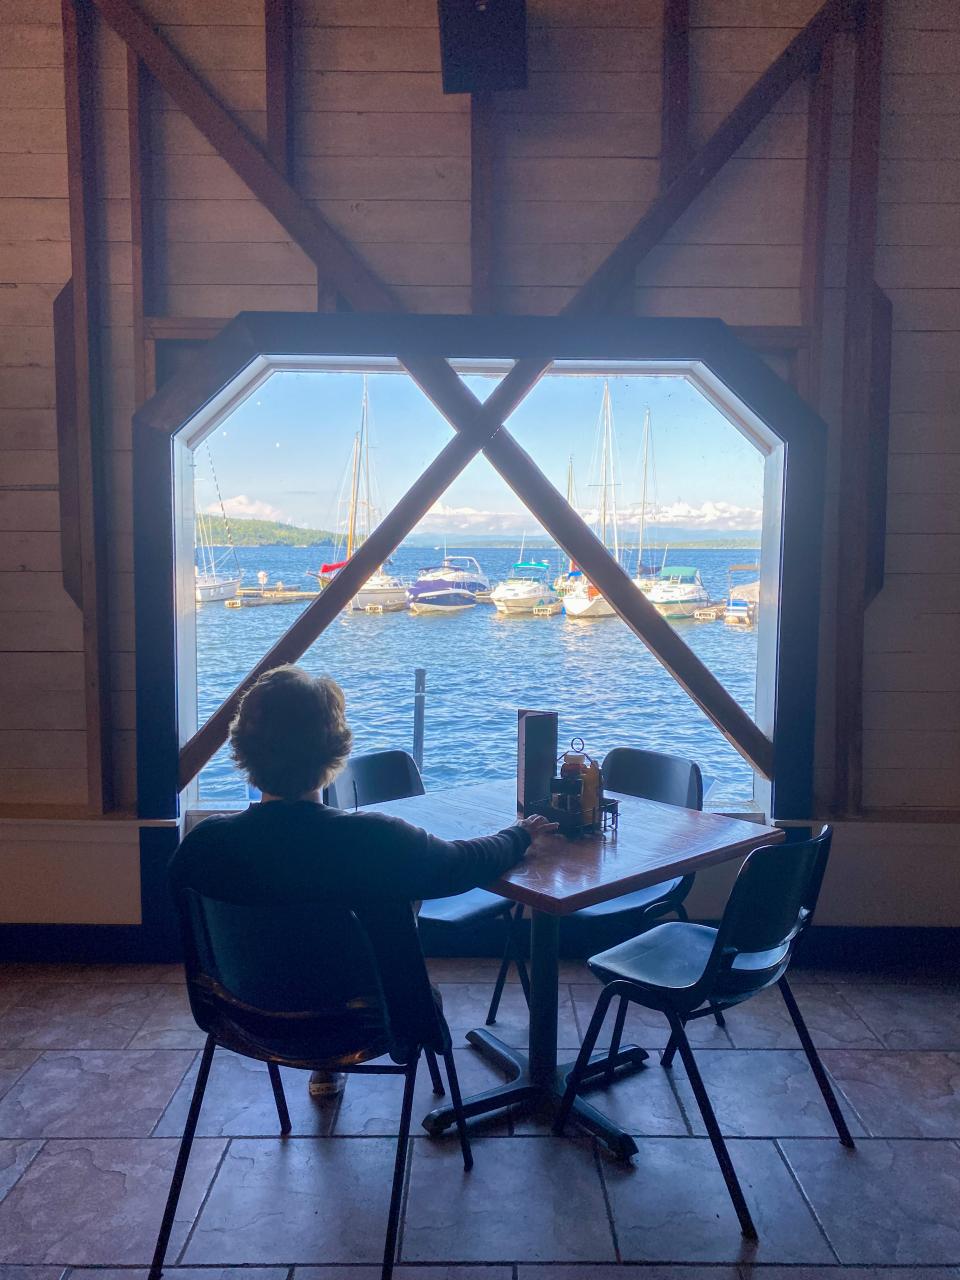 A woman at a restaurant table looks out a large window to a lake view.